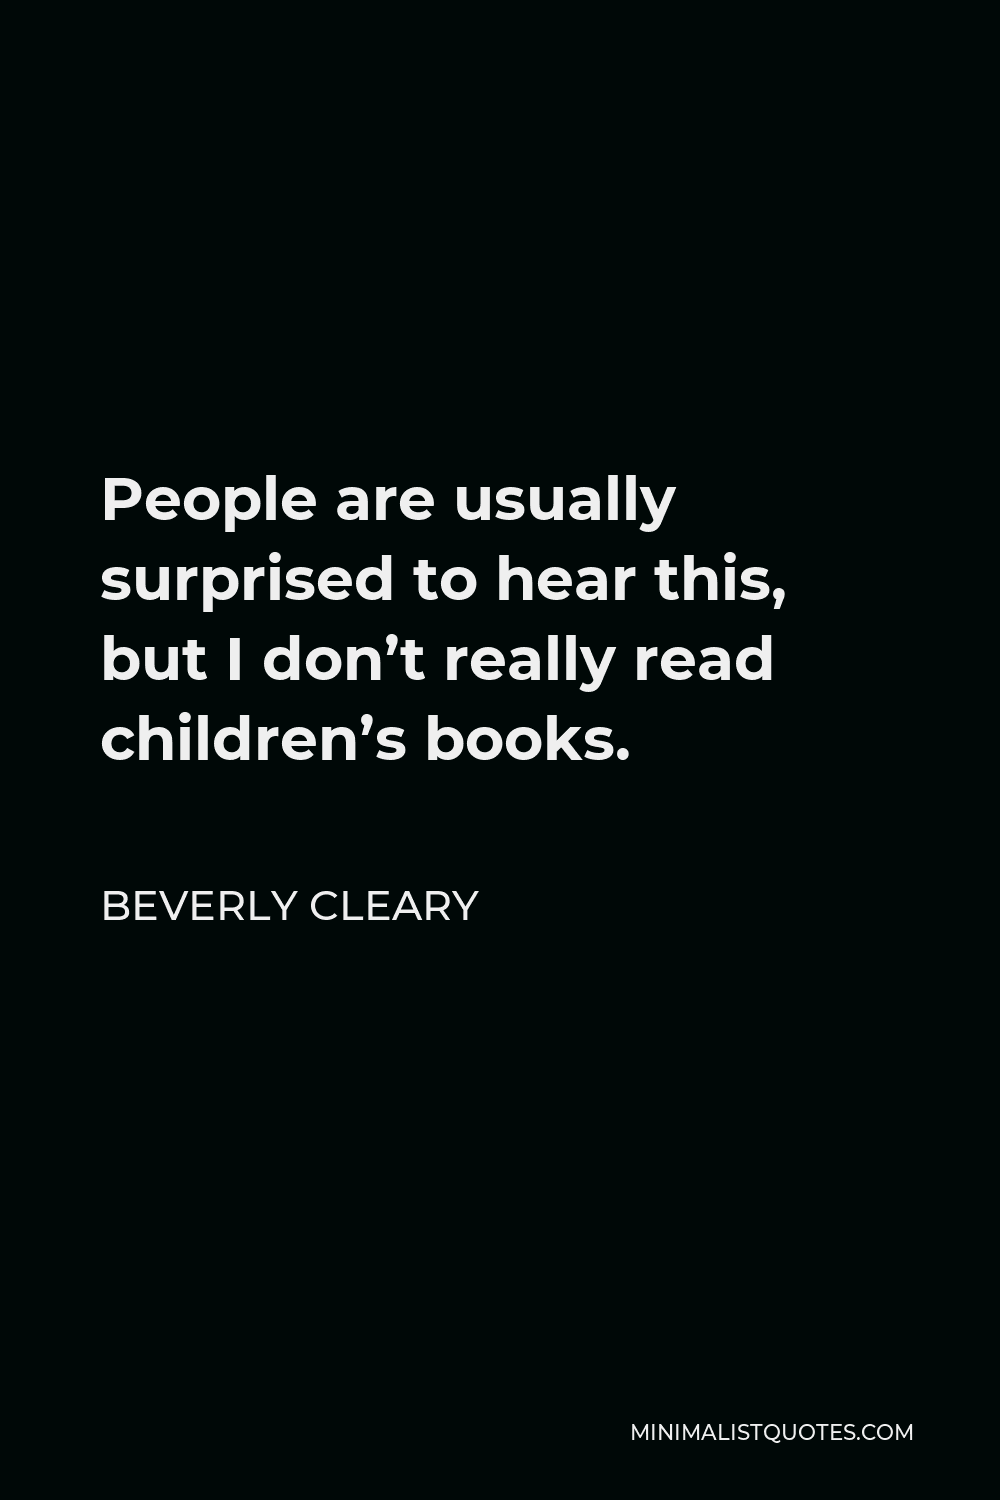 Beverly Cleary Quote - People are usually surprised to hear this, but I don’t really read children’s books.